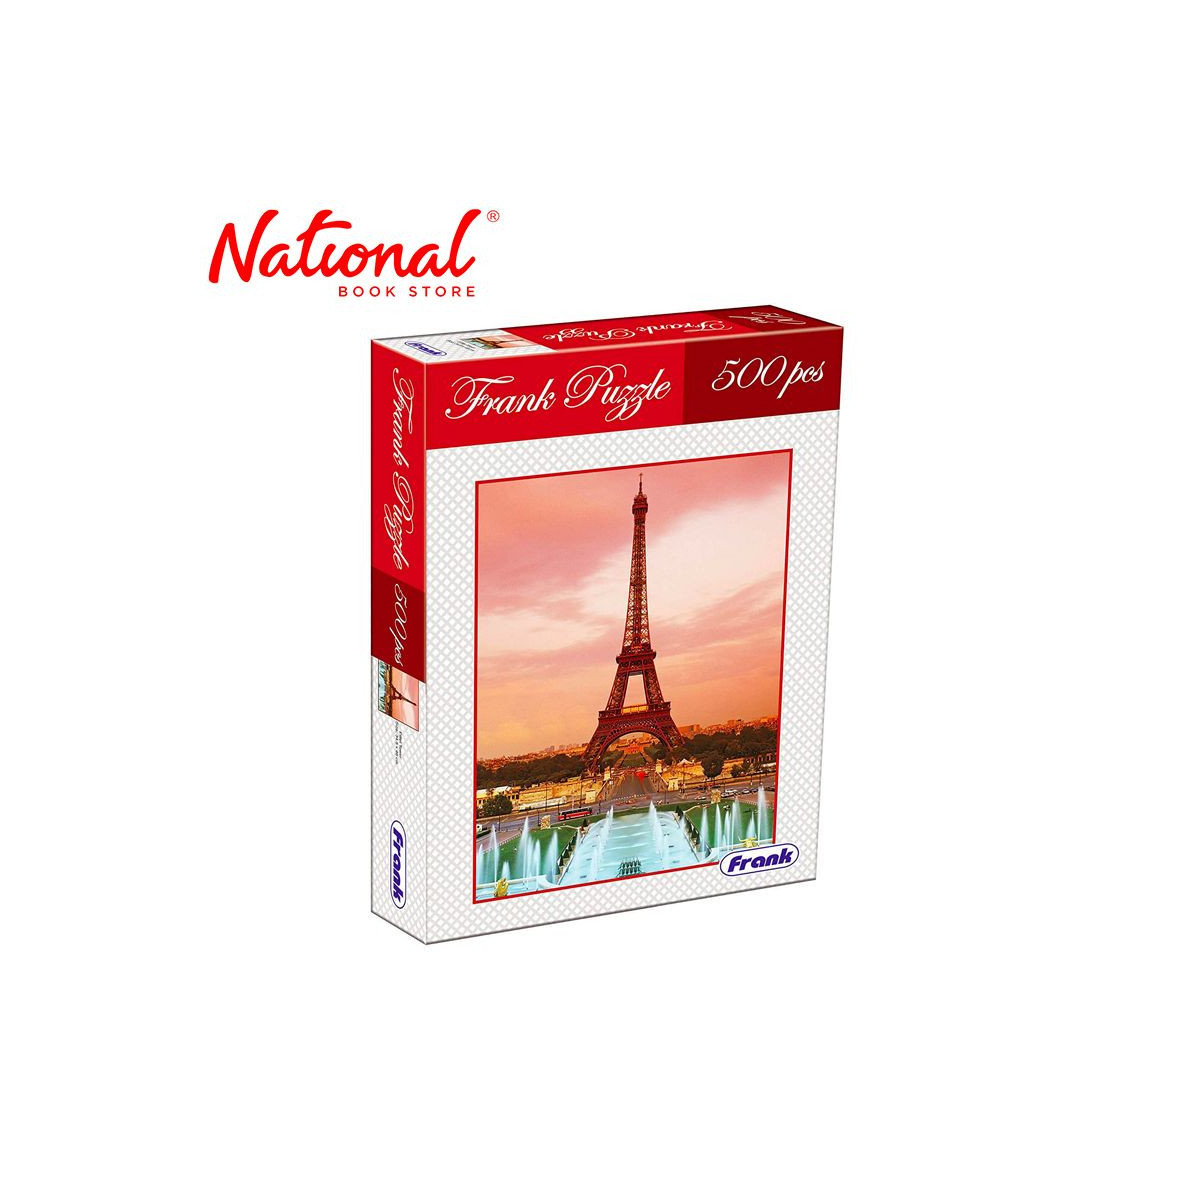 Puzzle Frank Eiffel Tower 500 pieces 33906 - Educational Toys & Games